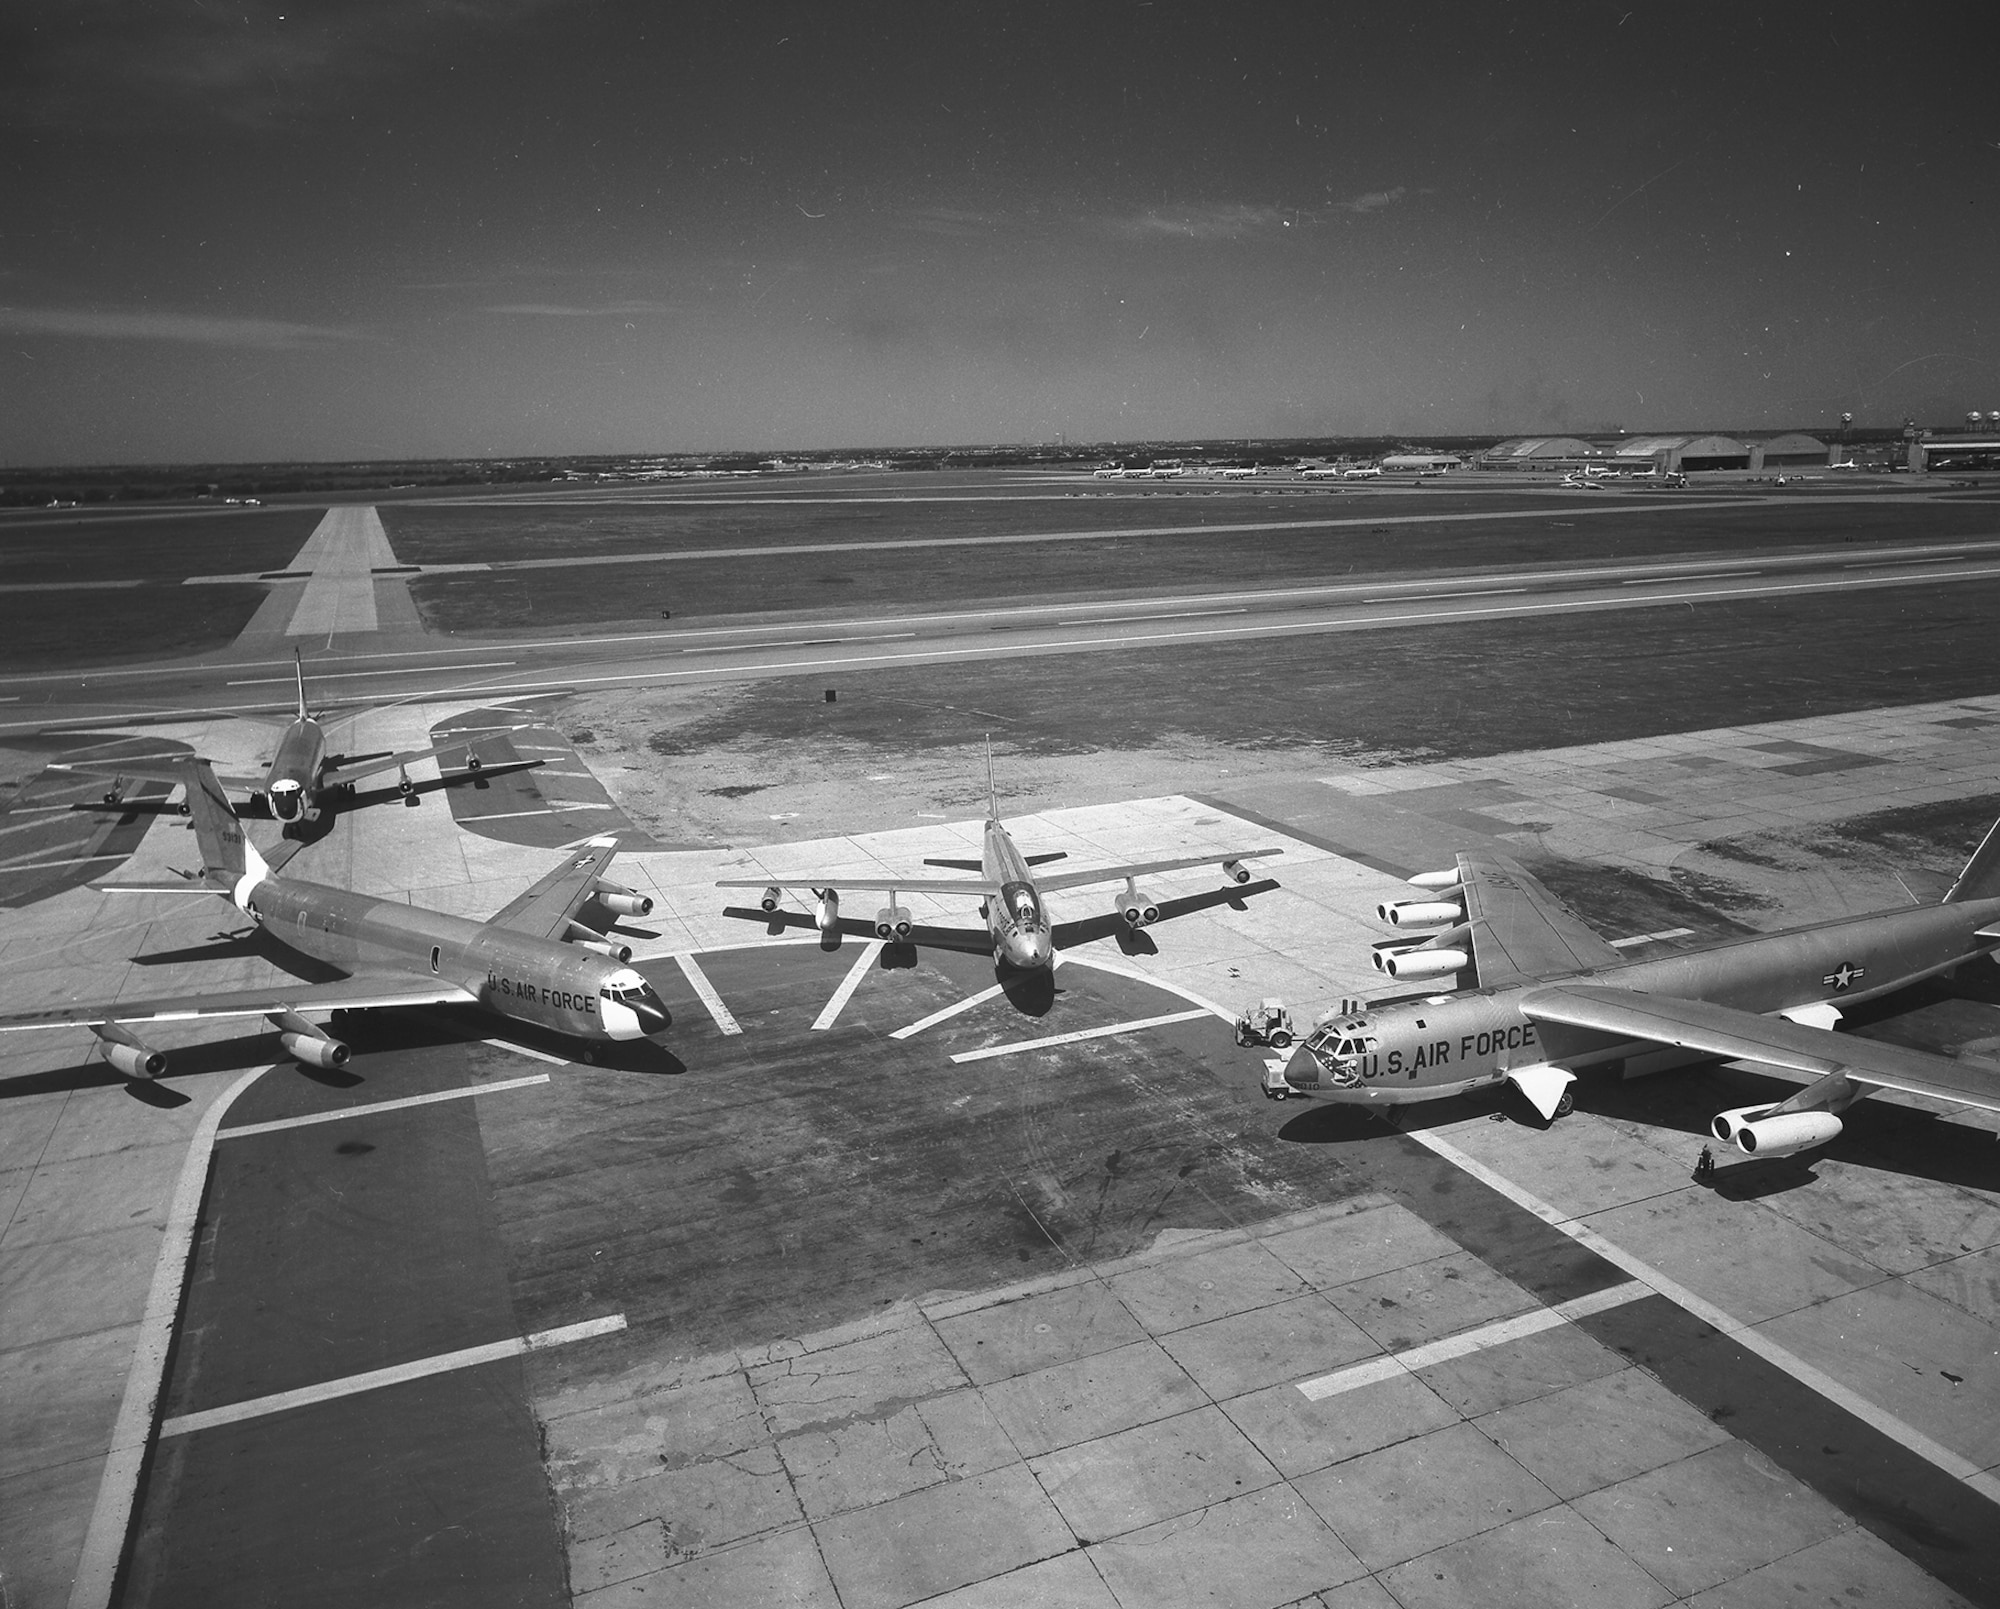 A KC-135, B-47 and B-52 sit on the ramp at Tinker Air Force Base, circa late 1950s.